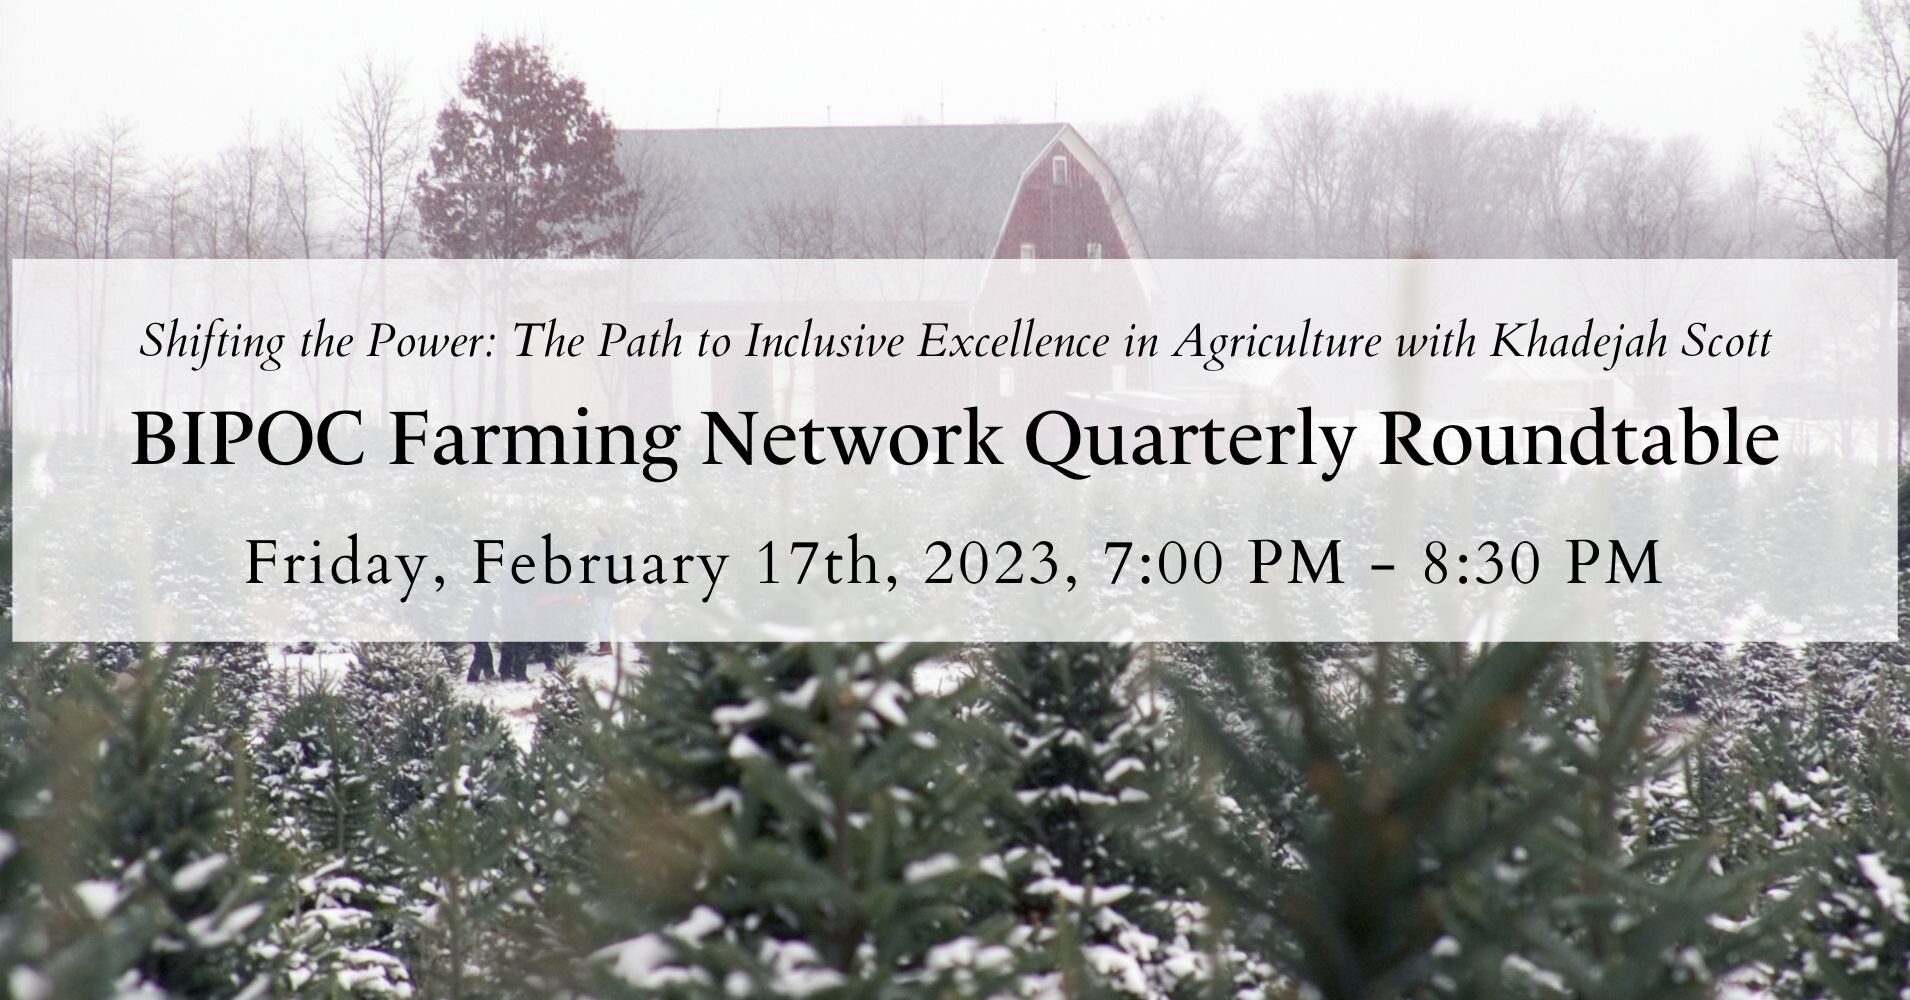 Shifting the Power: The Path to Inclusive Excellence in Agriculture

Sign up here: https://community.agrariacenter.org/e/bfn-roundtable-shifting-the-power/

This February's BIPOC Farming Network Virtual Roundtable will be held on Friday, February 17,